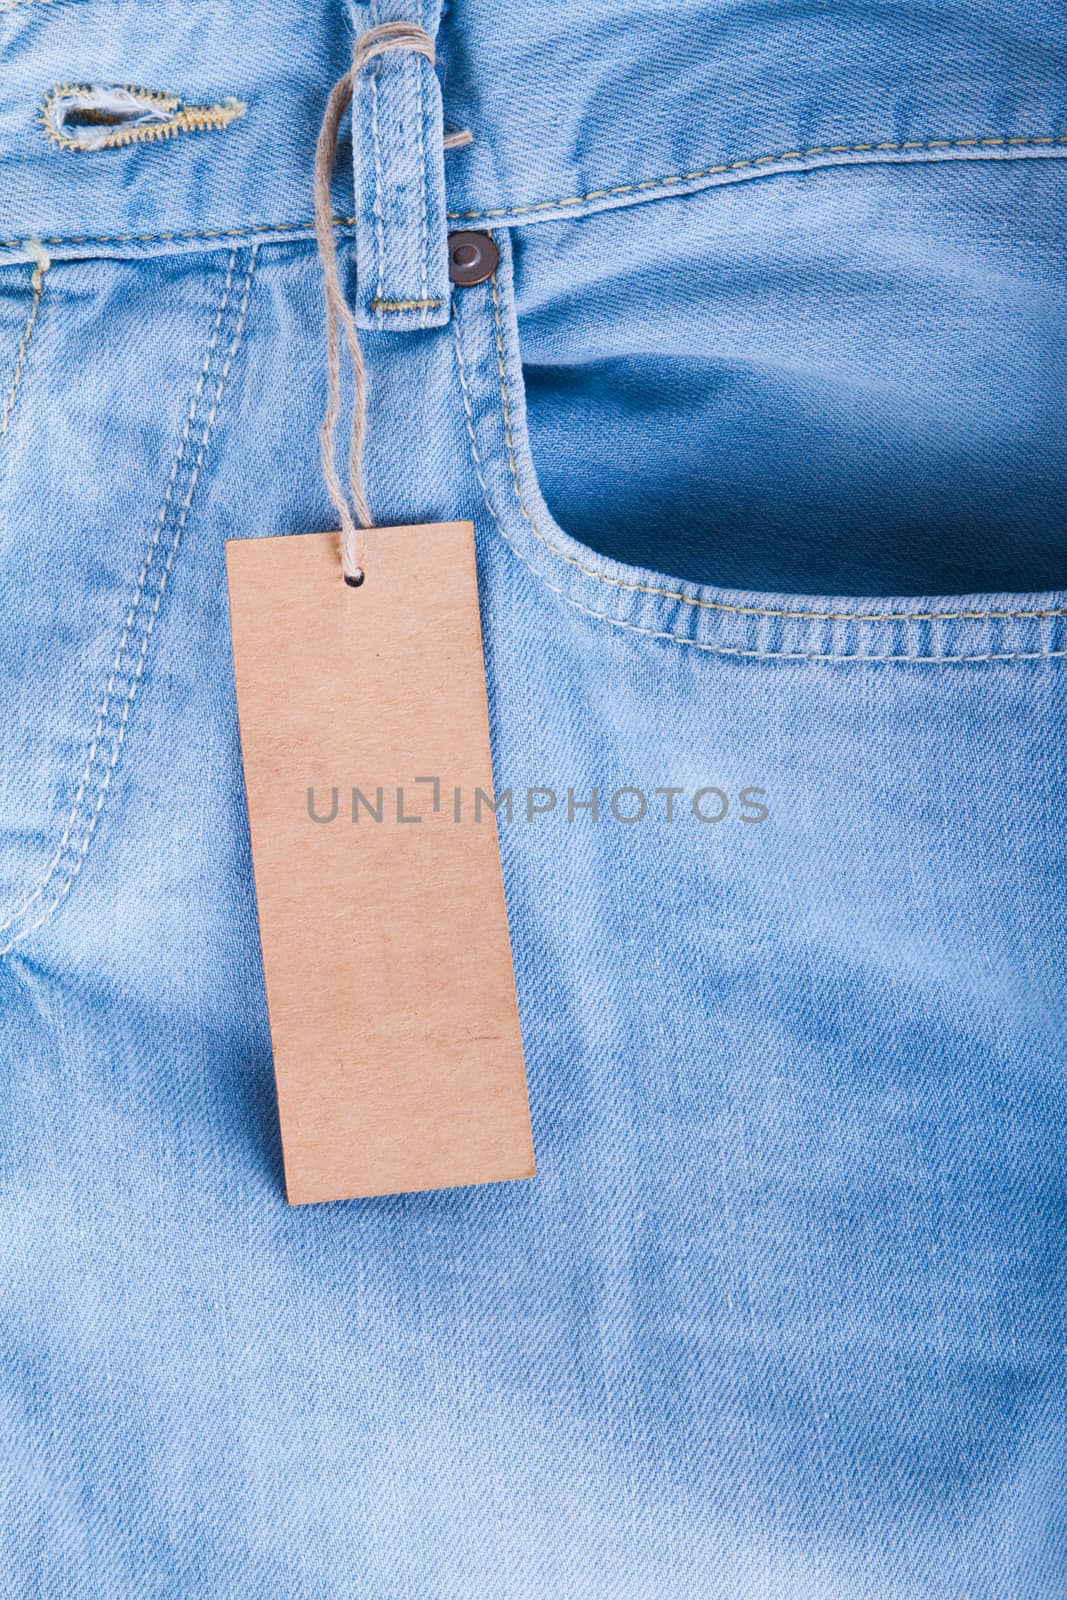 Blue jeans detail with blank label by grigorenko